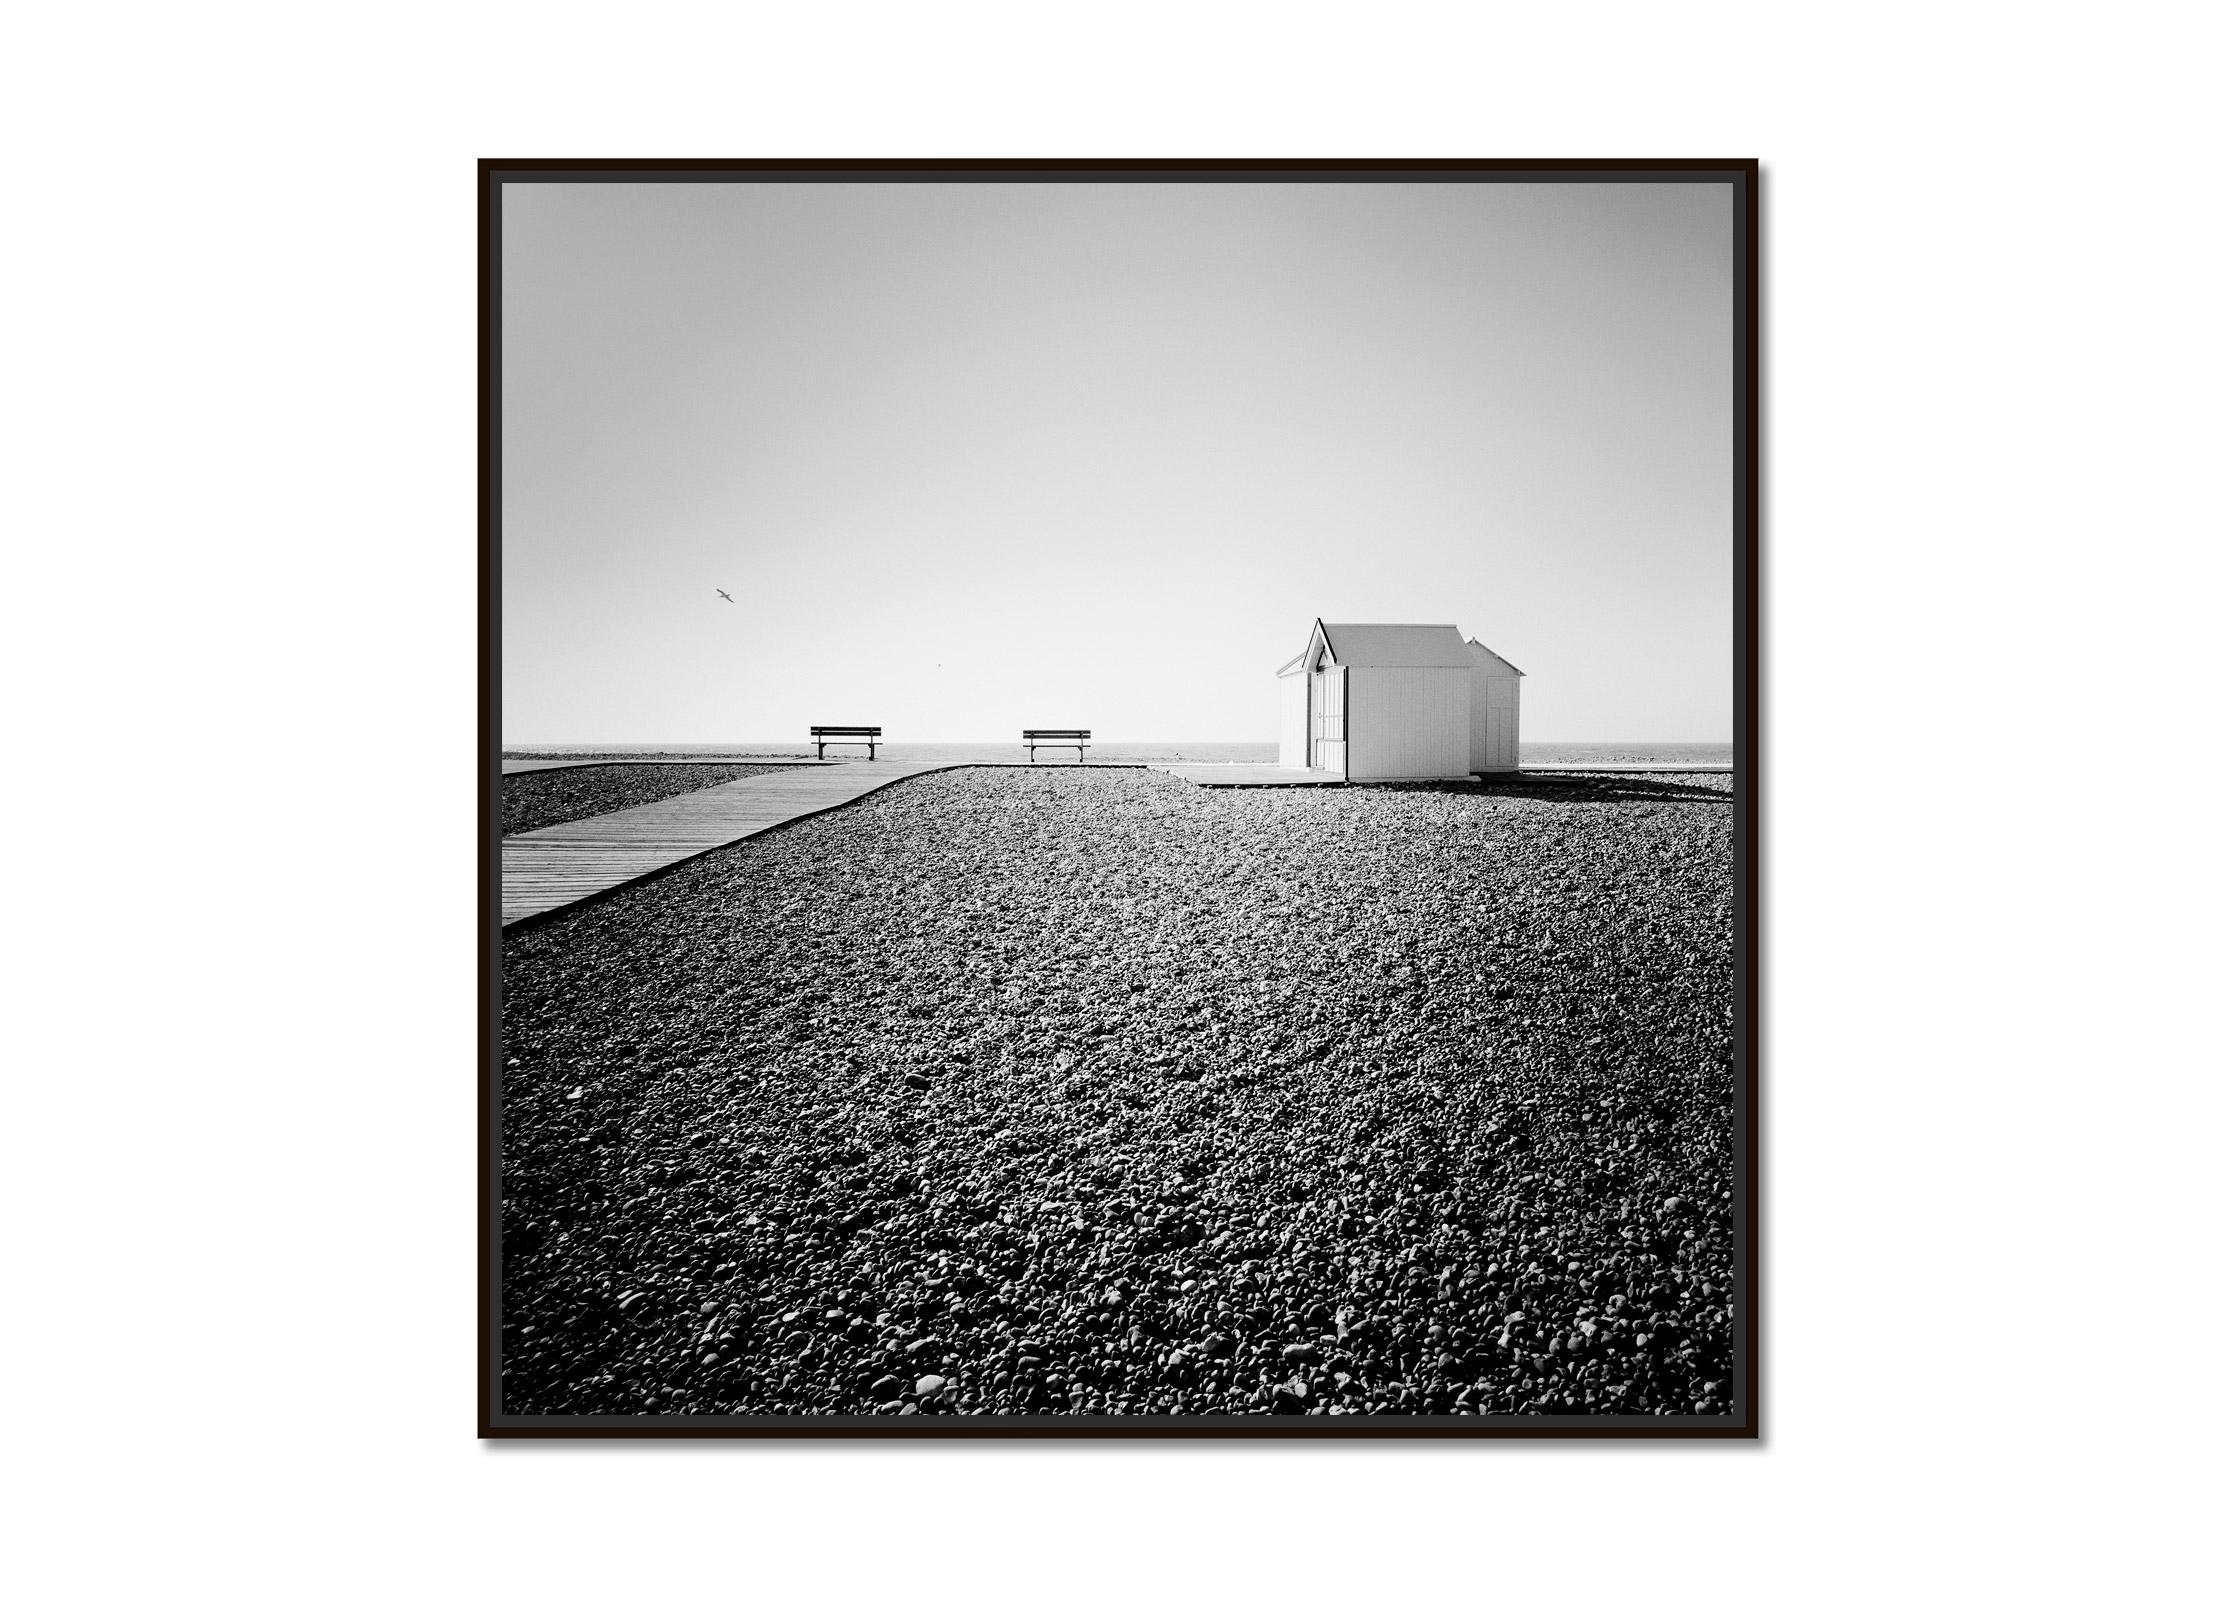 Beach Huts, Rocky Beach, Bench, France, black and white photography, landscape - Photograph by Gerald Berghammer